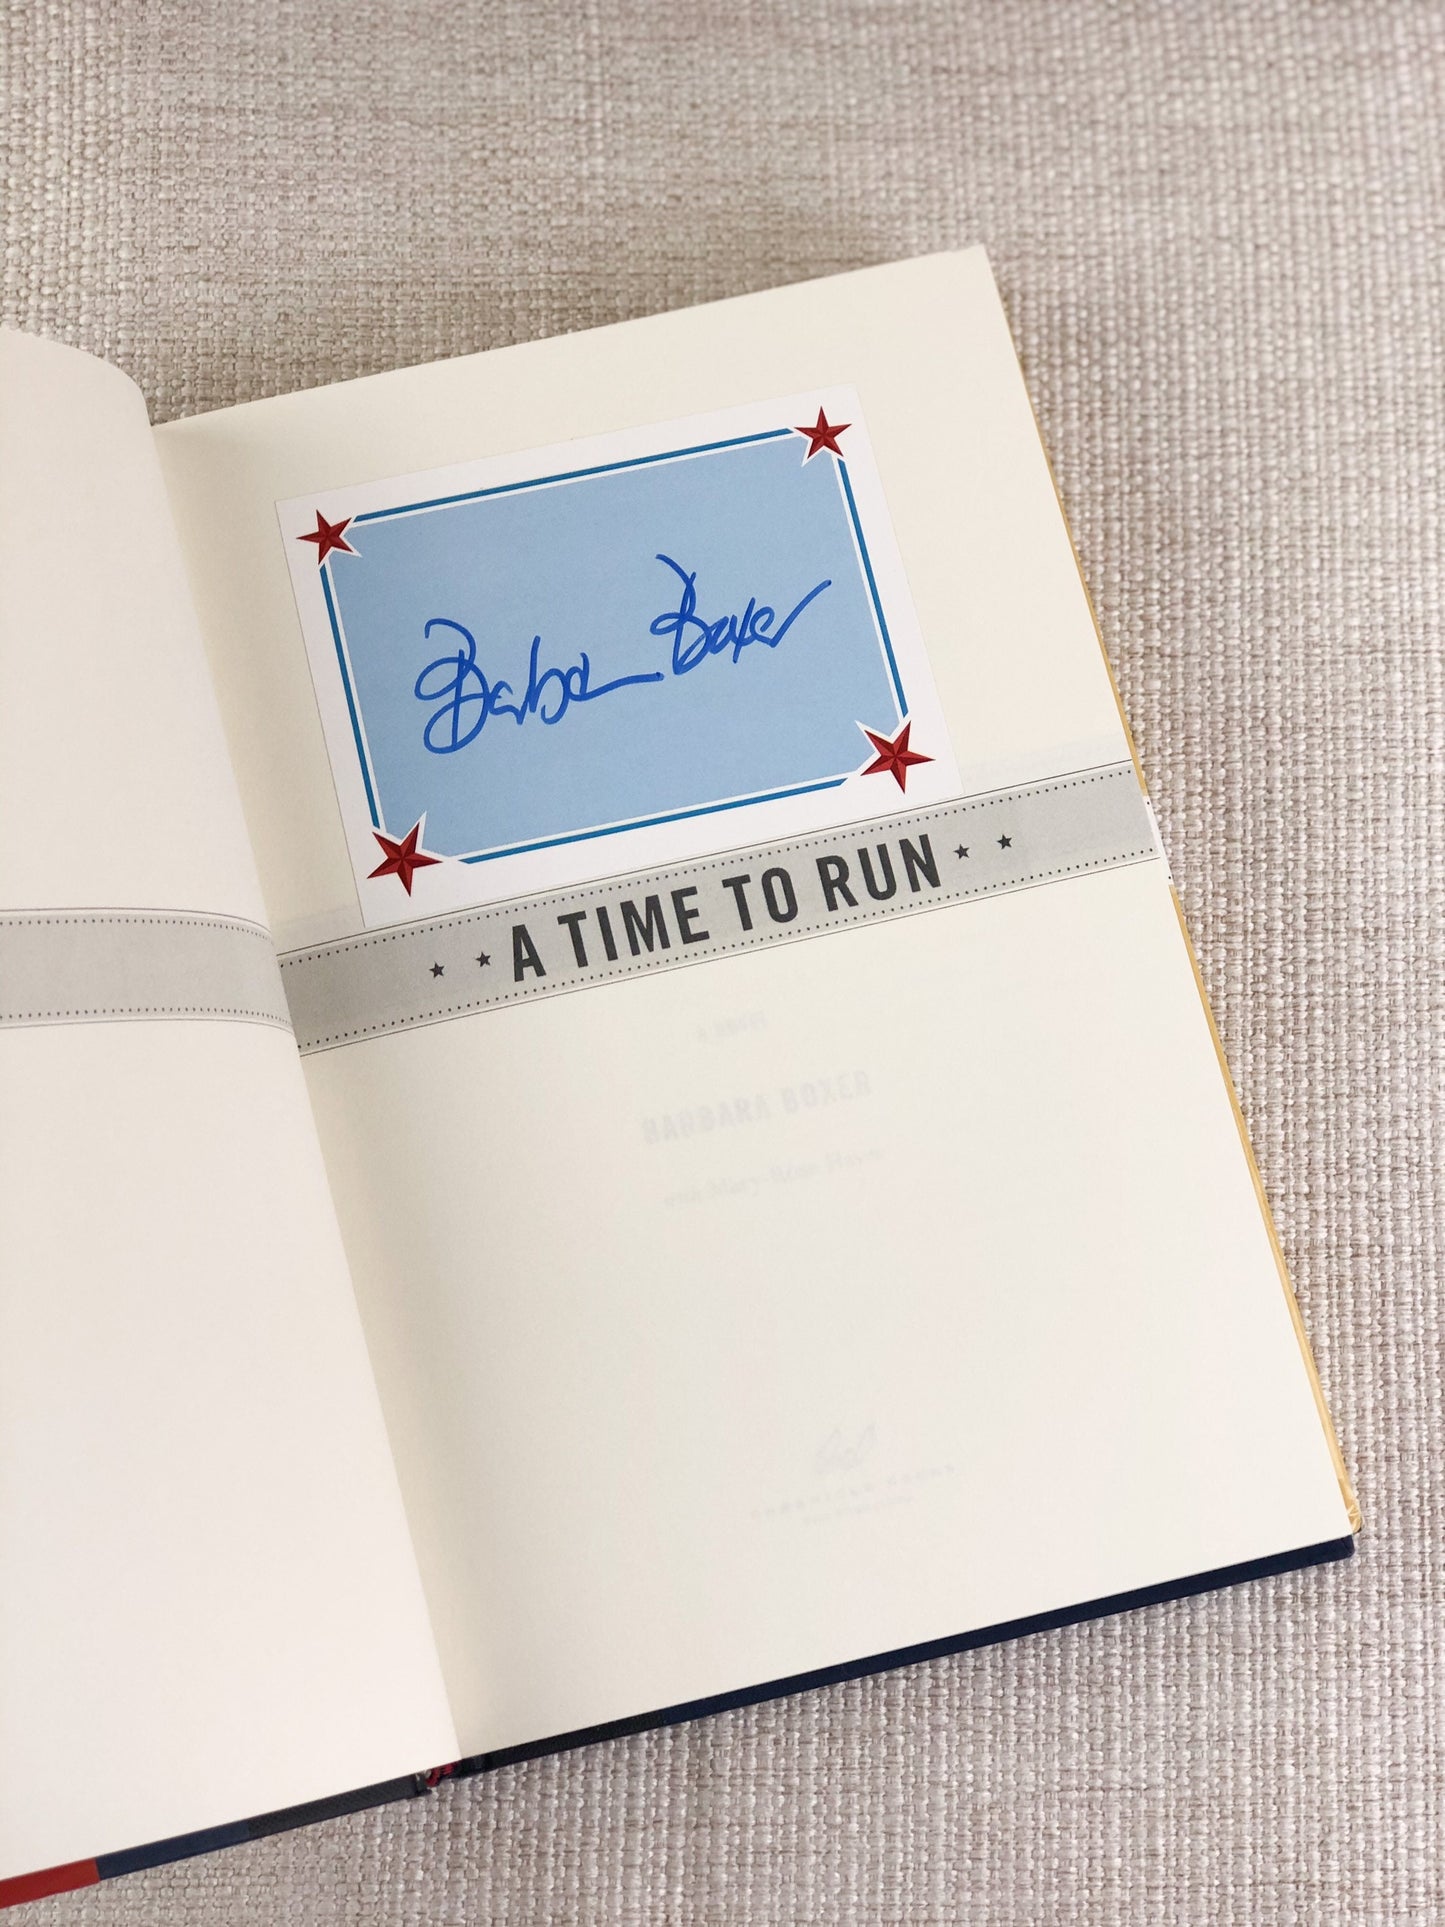 Signed First Edition Book by Barbara Boxer / A Time To Run